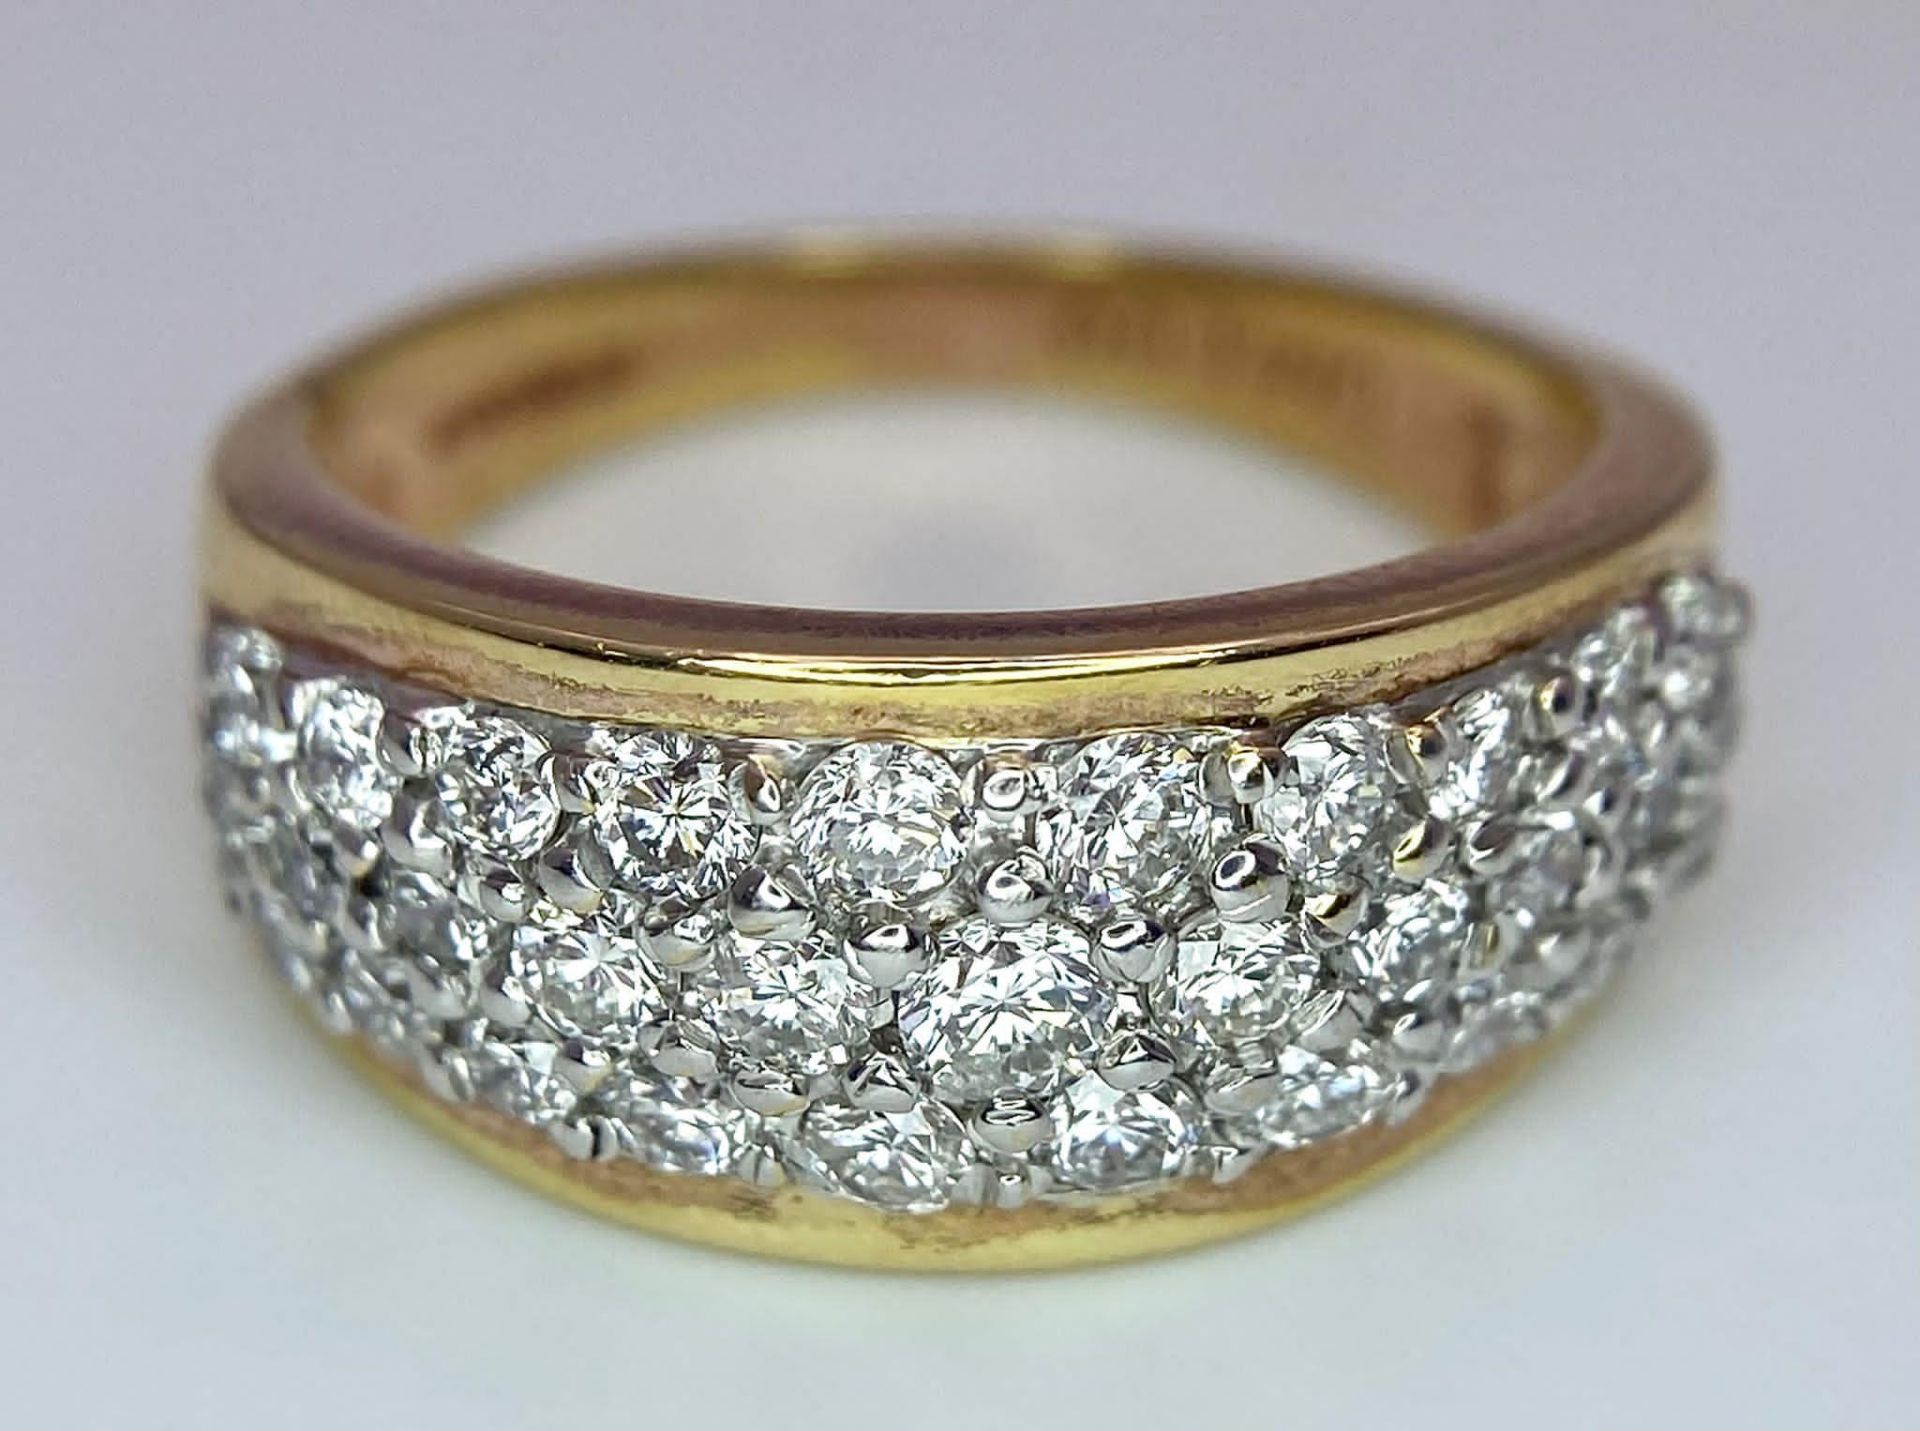 An 18K Yellow Gold Three-Row Cluster Ring. 1ctw. Size M. 5.5g total weight. - Image 6 of 15